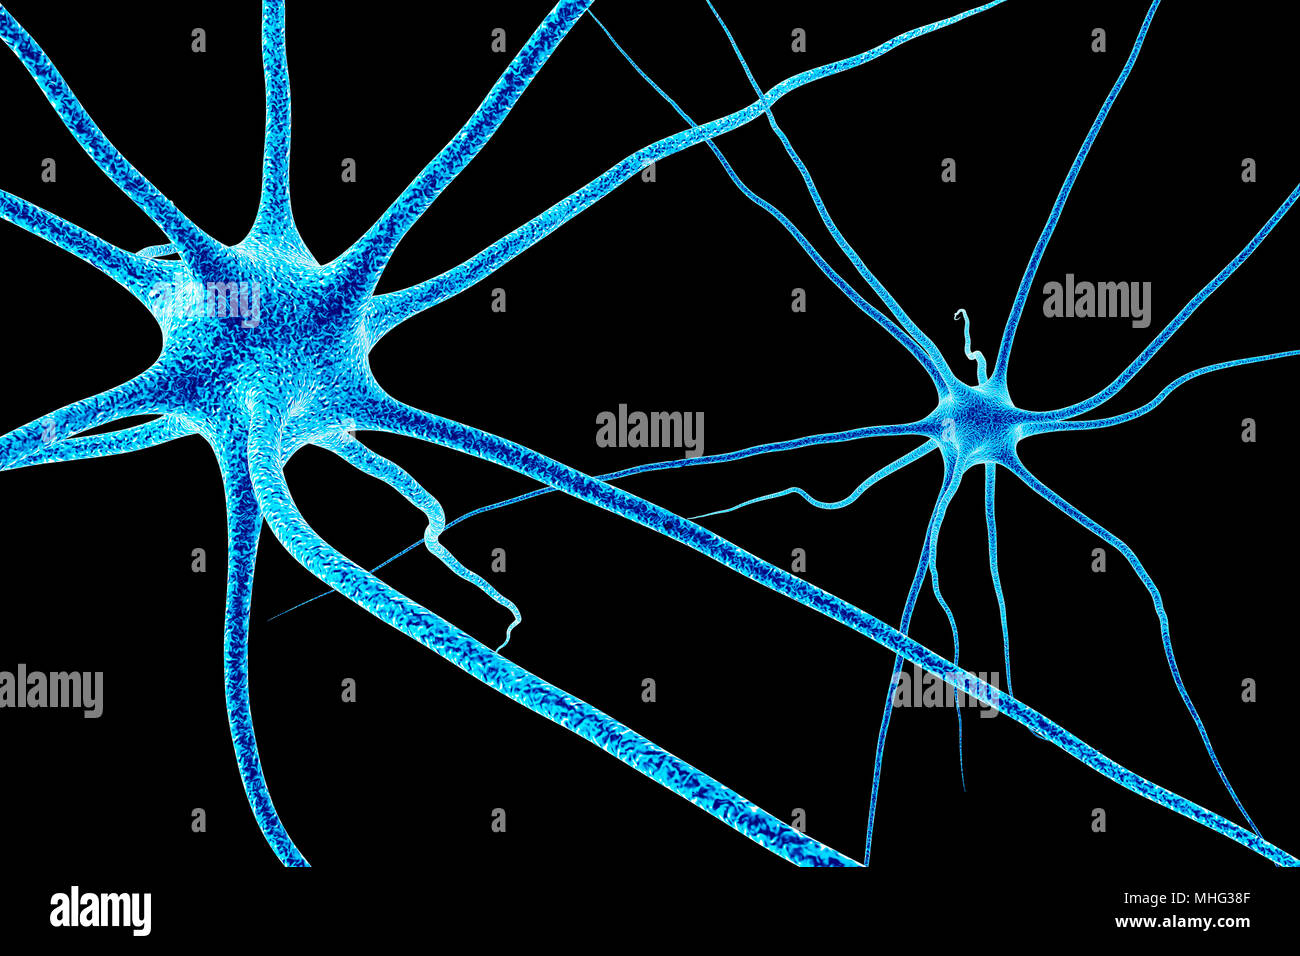 The neurons of the brain cell. 3D render Stock Photo